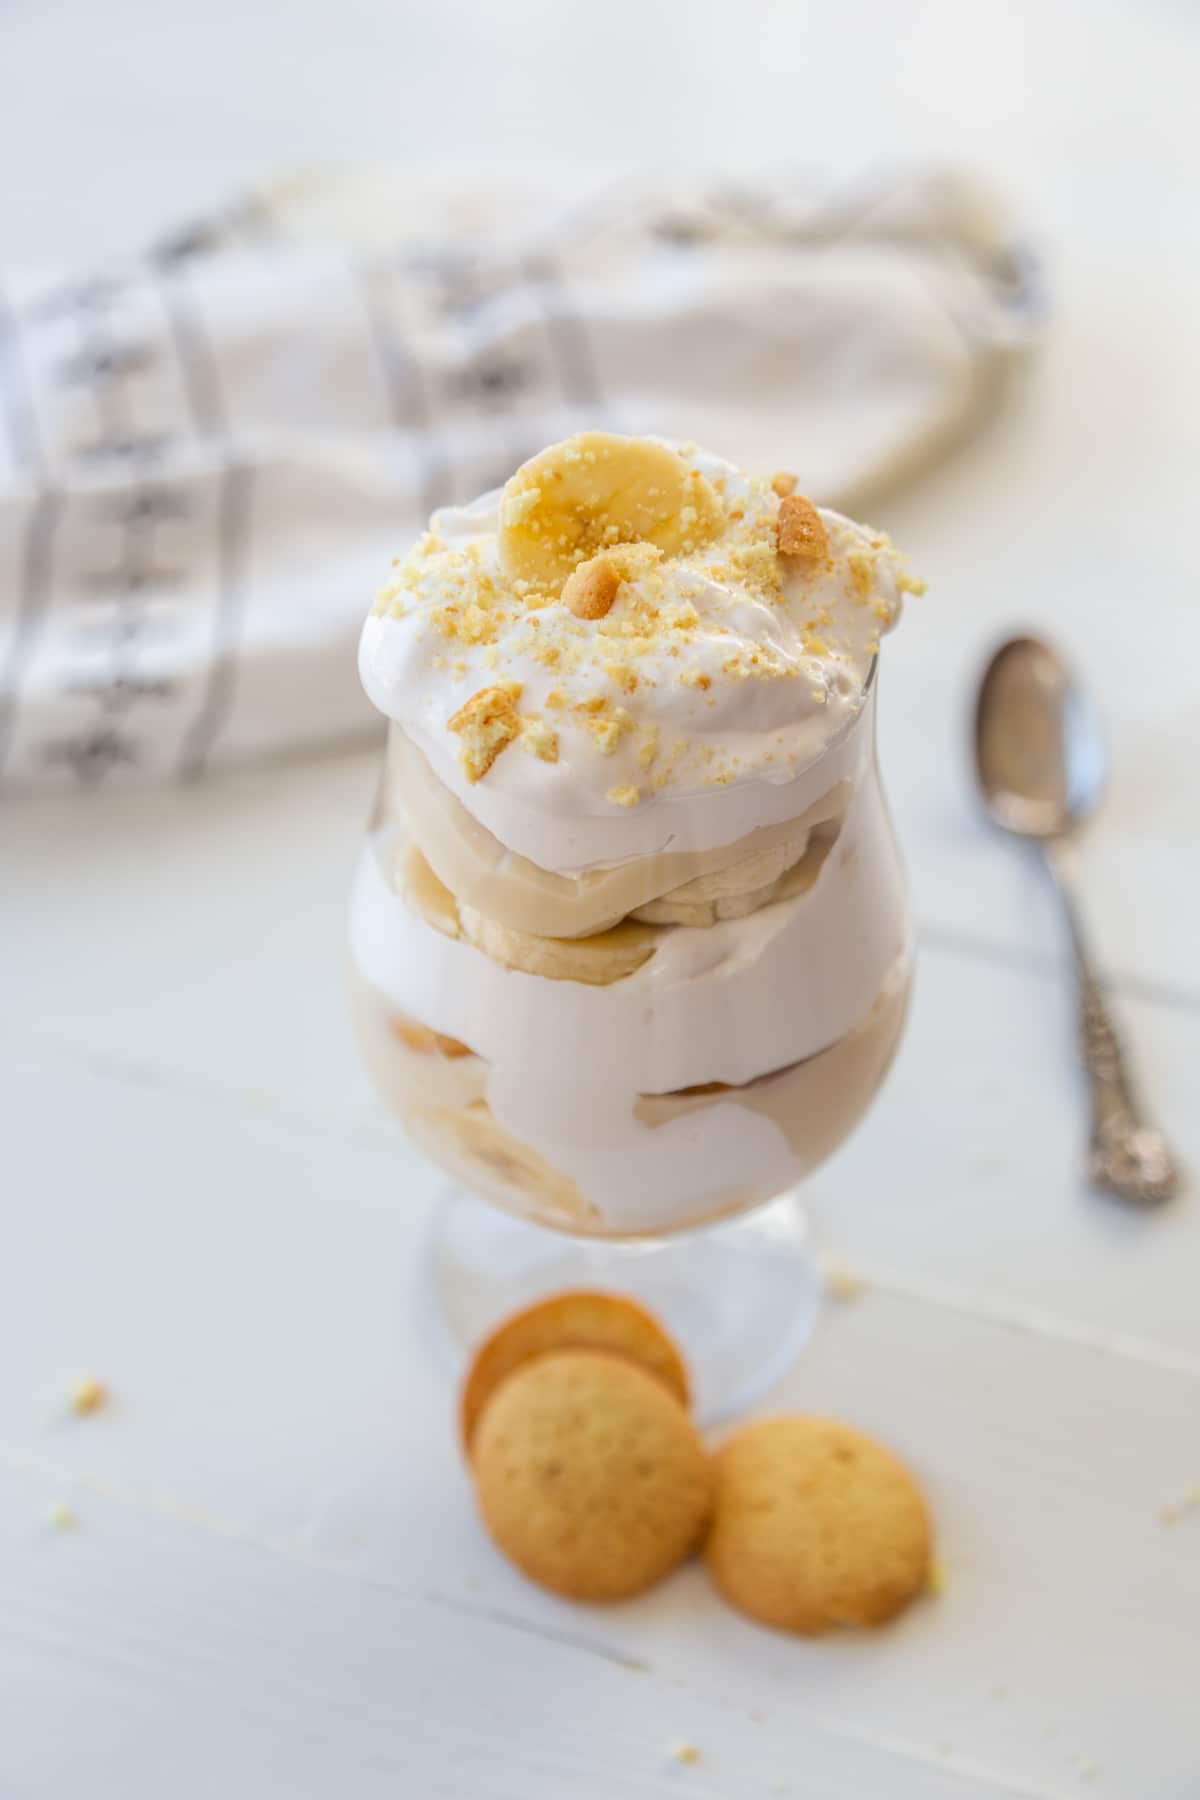 A glass with banana pudding with a slice of banana and crumbled vanilla wafers and a spoon and wafers next to it.